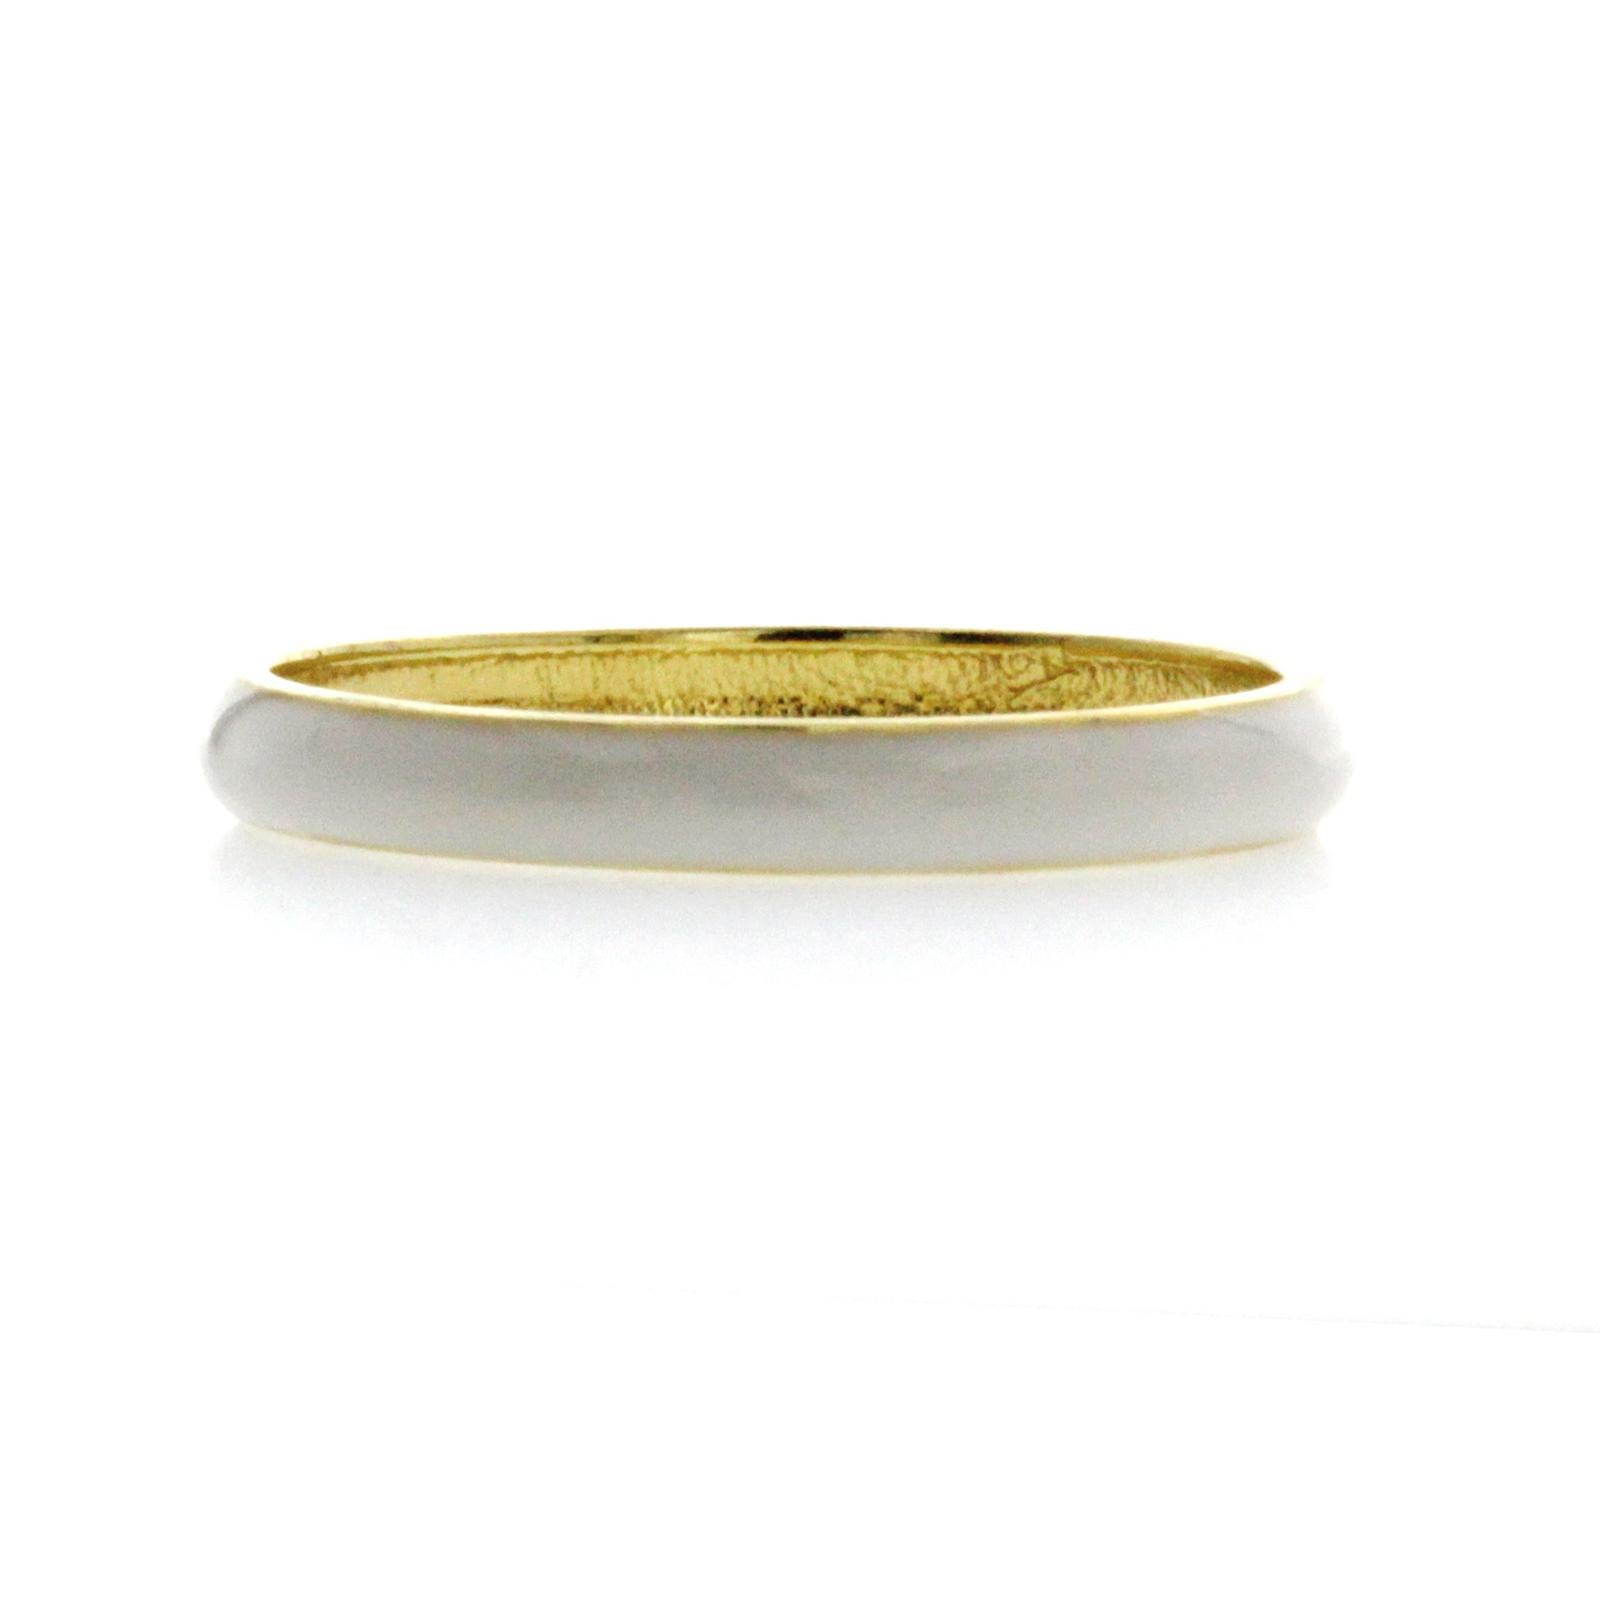 100% Authentic, 100% Customer Satisfaction

Top: 3 mm

Band Width: 3 mm

Metal: 14K Yellow Gold 

Size: 4 to 8 

Hallmarks: 14K 

Total Weight: 1.4 to 1.6 Grams

Stone Type: Enamel

Condition: New

Estimated Retail Price: $450

Stock Number: NP1-E1